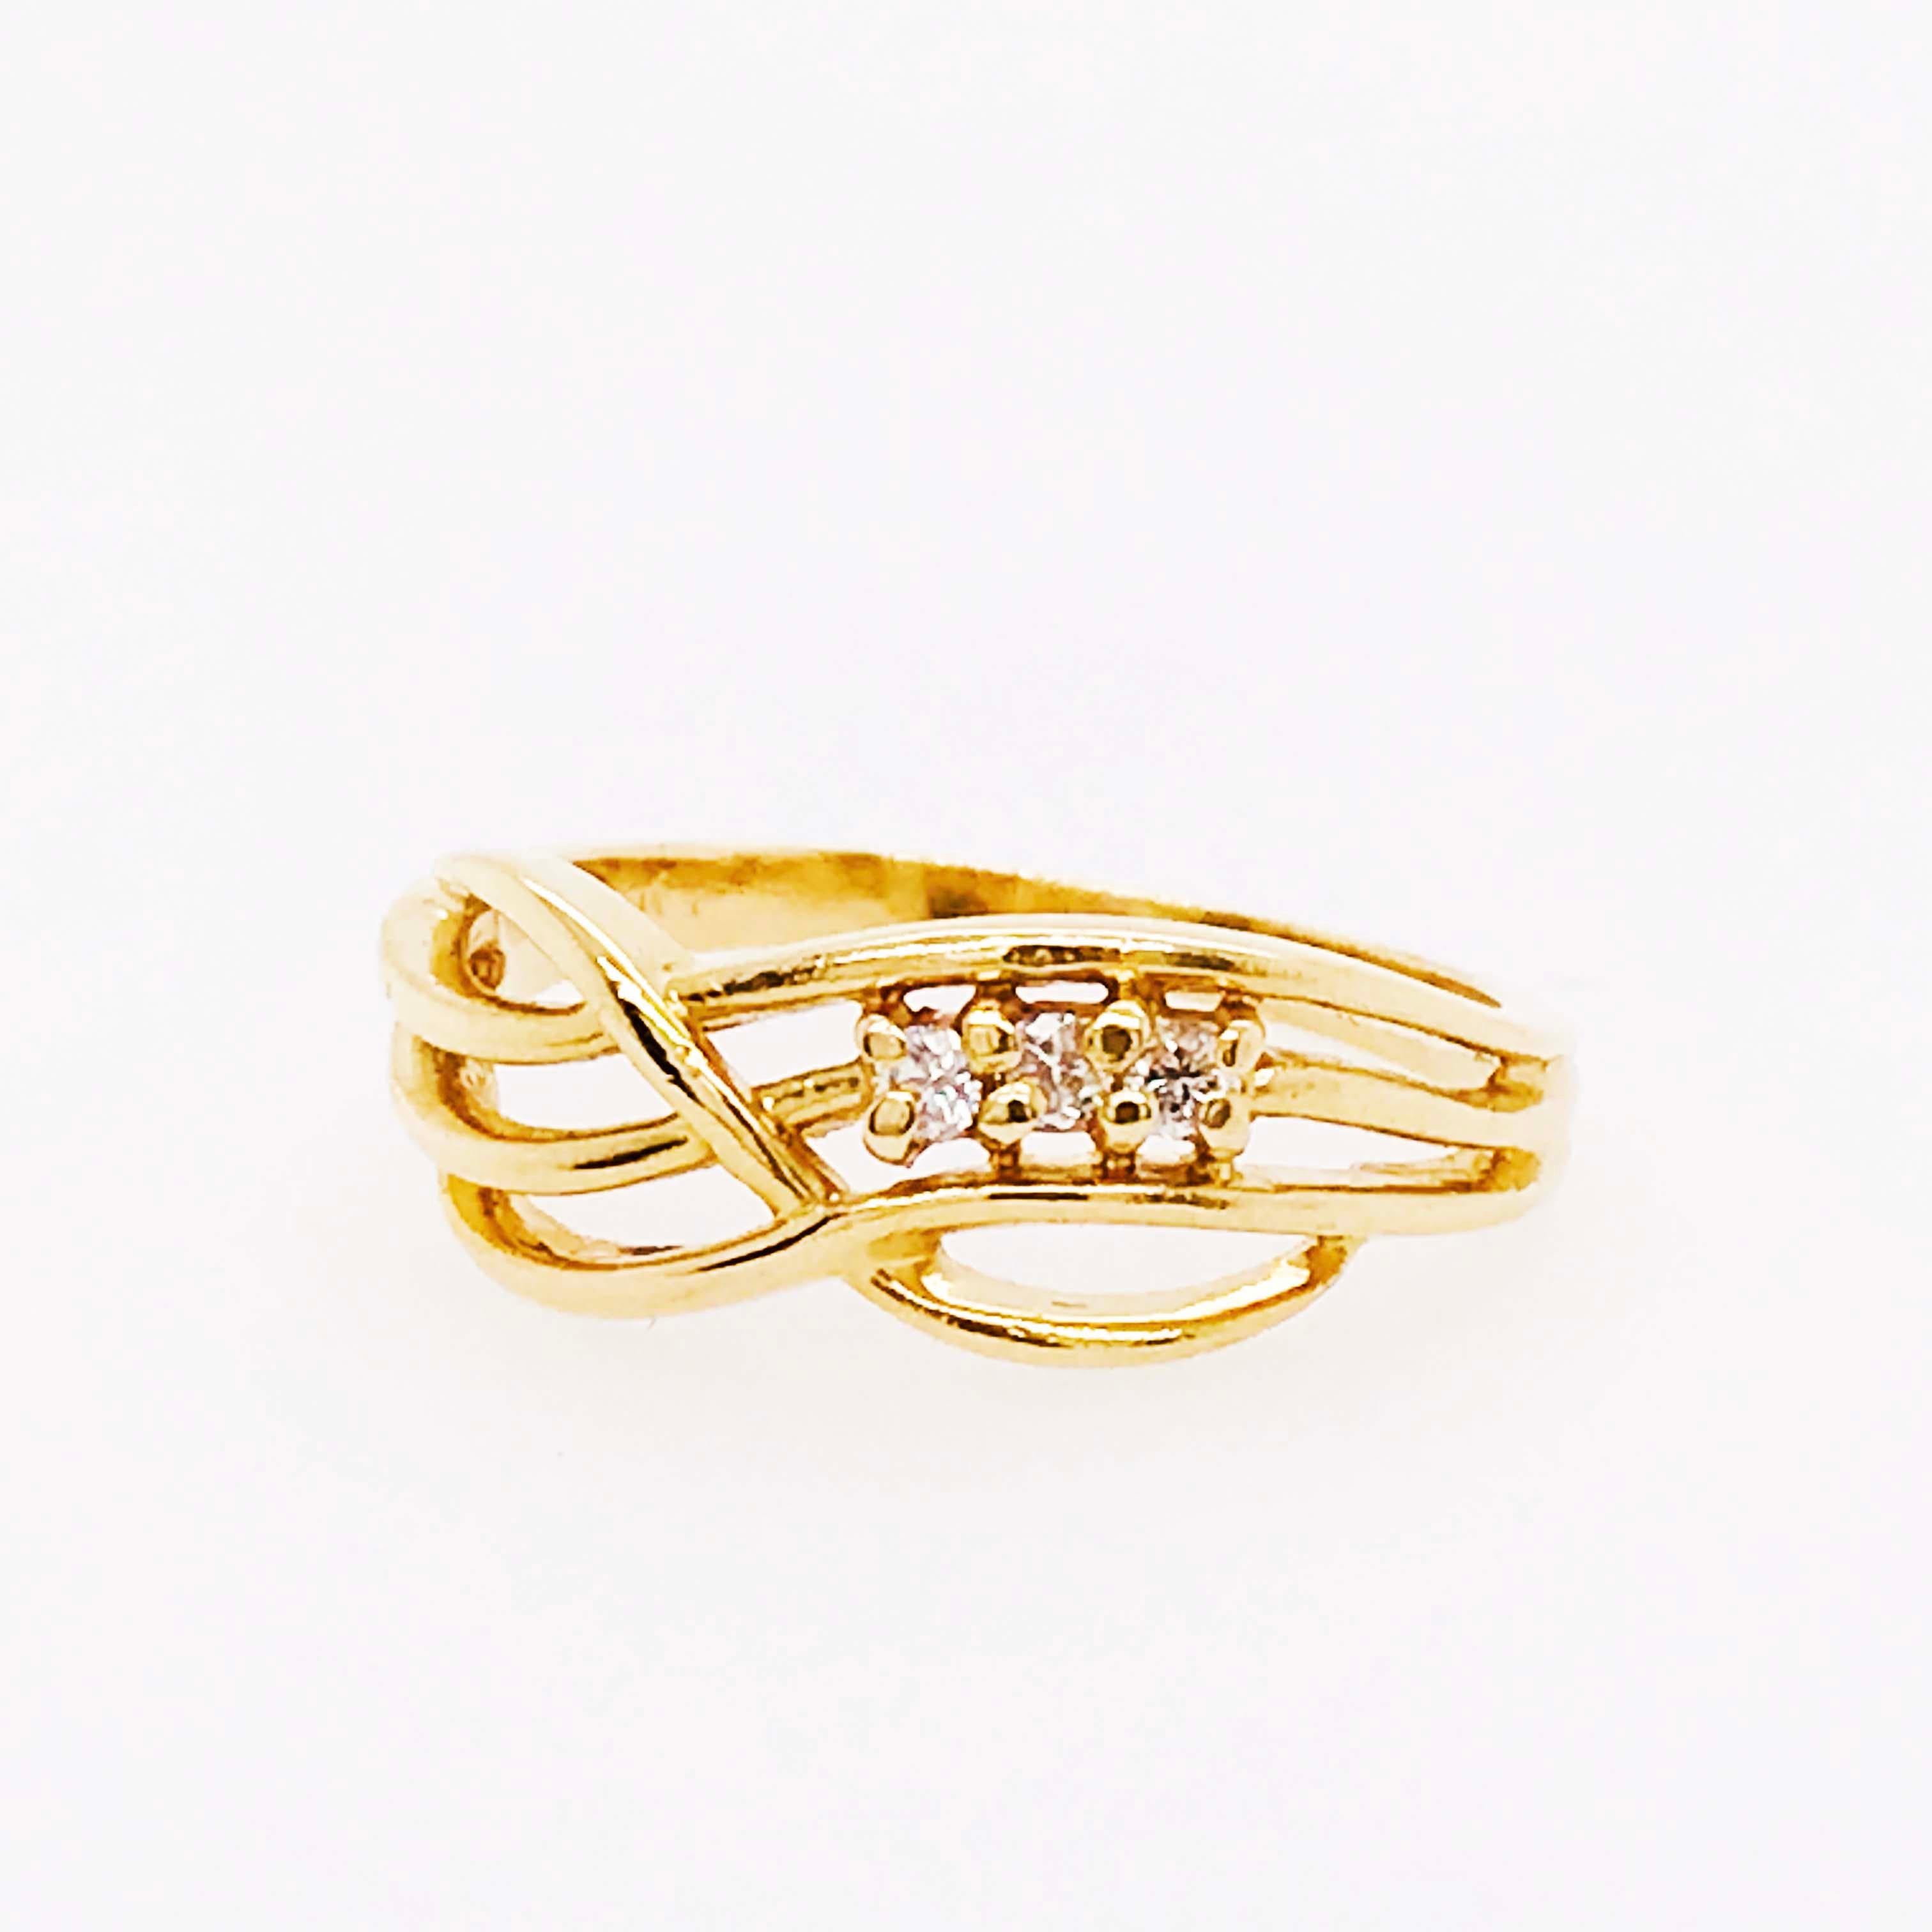 Contemporary Diamond Infinity Band, 0.07 Carat Twisted Design in 14 Karat Gold, Estate Ring